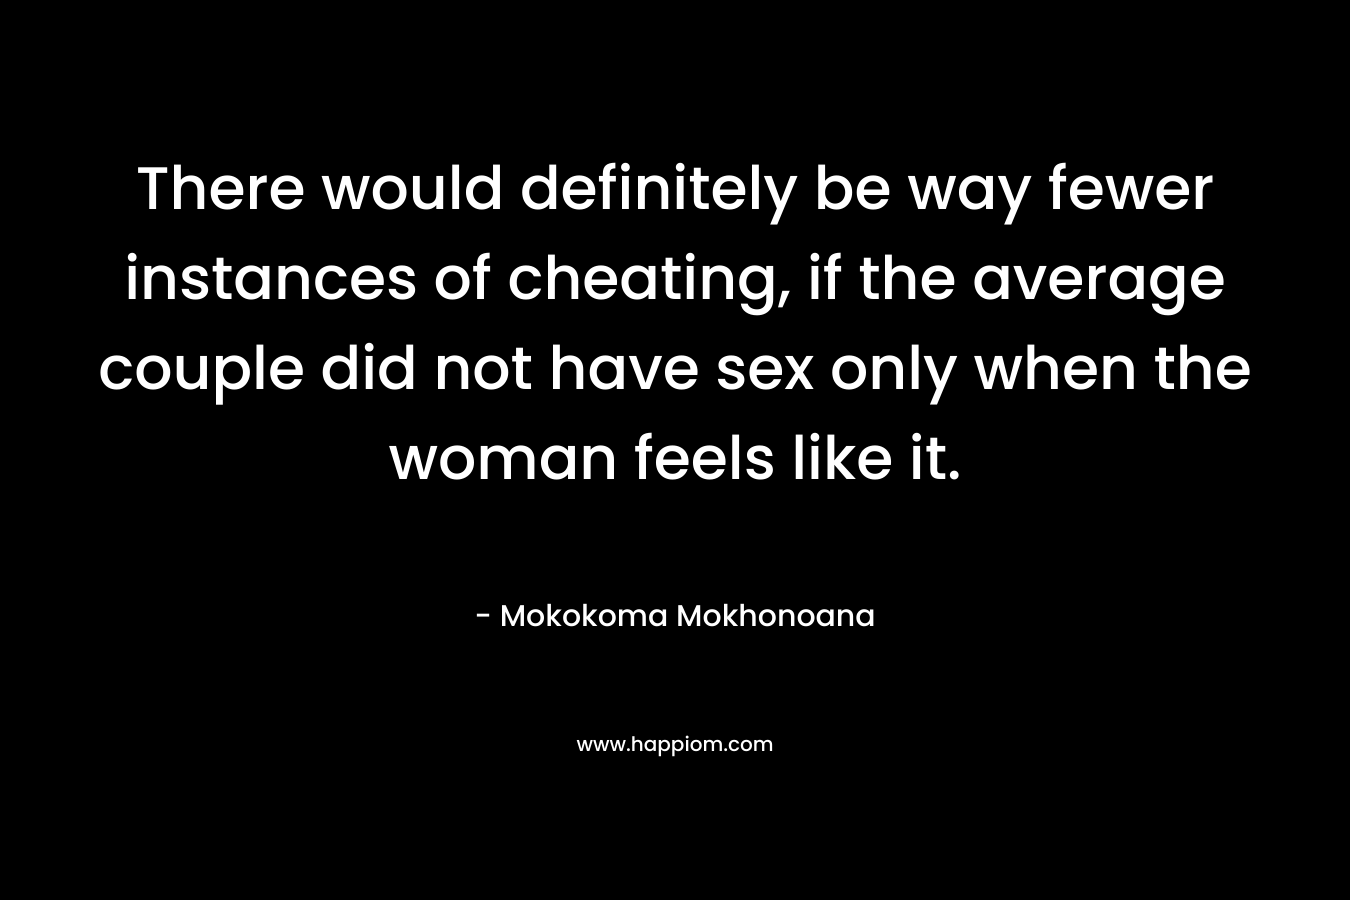 There would definitely be way fewer instances of cheating, if the average couple did not have sex only when the woman feels like it.